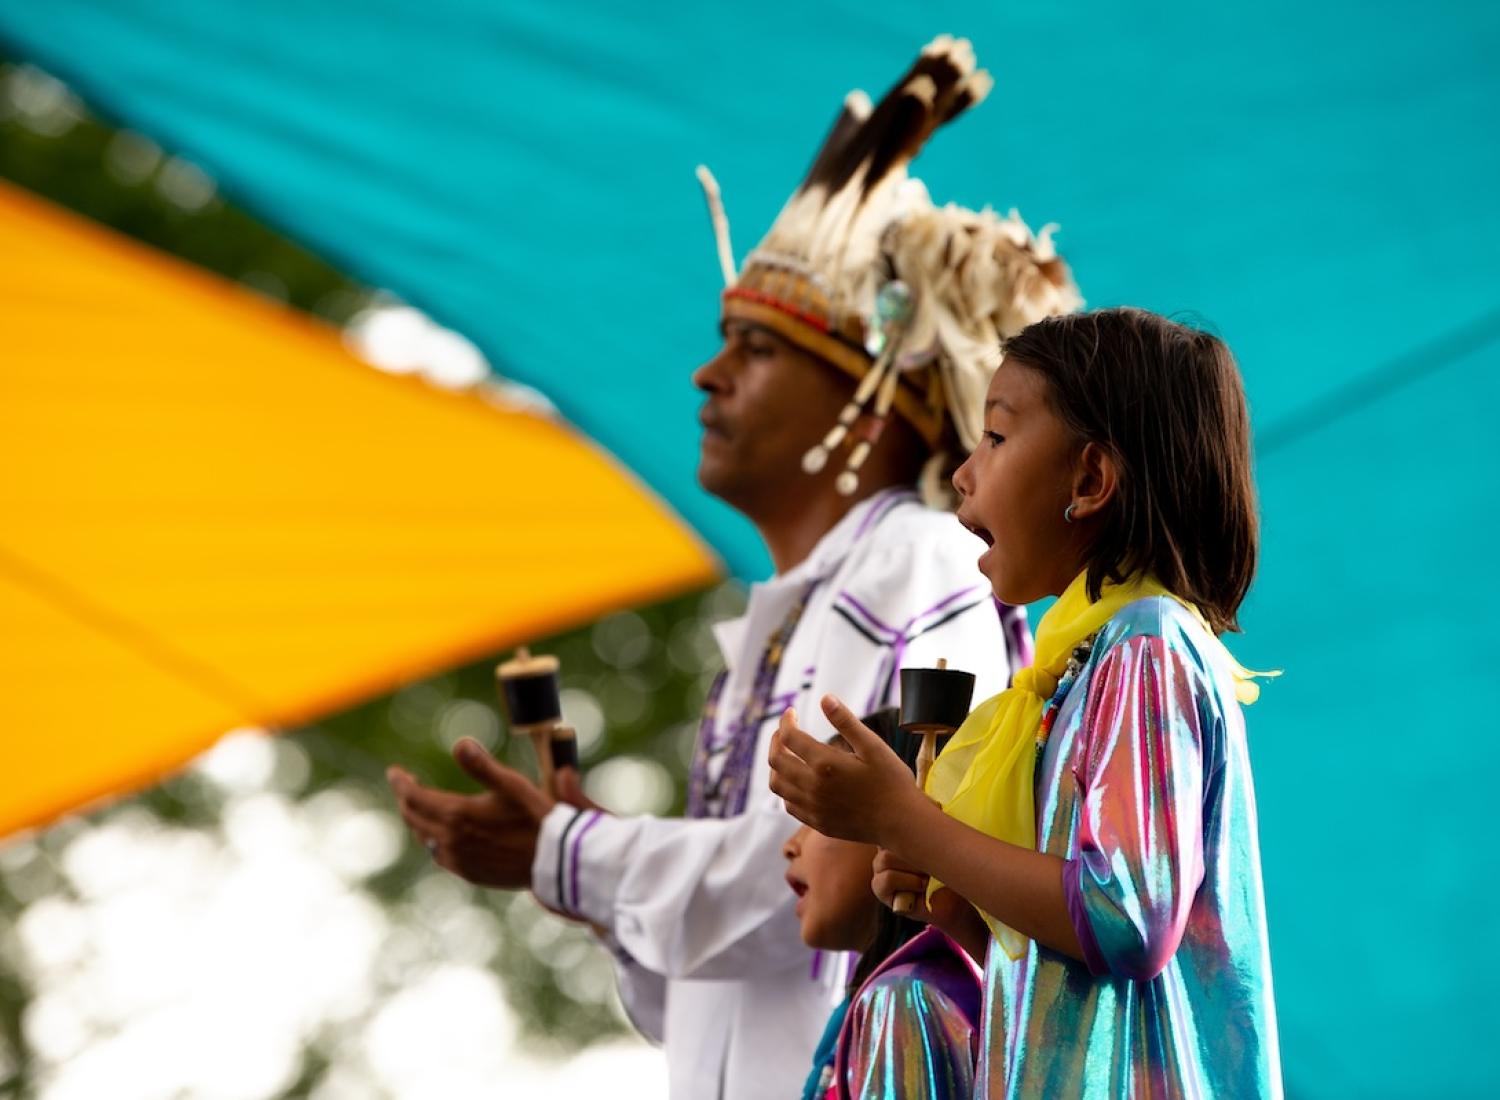 A man and a young girl in traditional clothing sing in front of a turquoise backdrop.